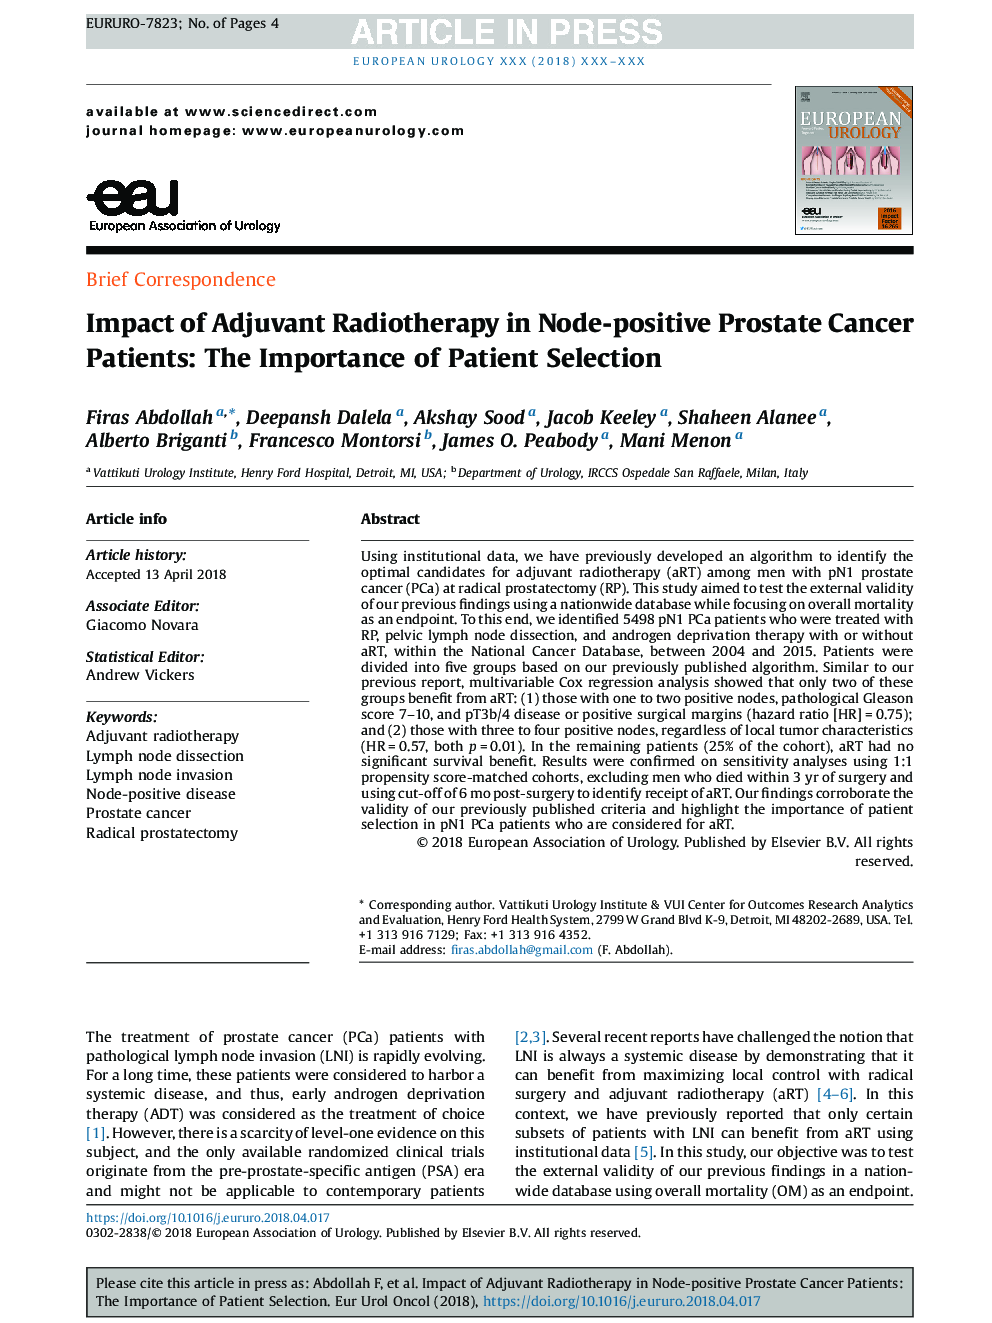 Impact of Adjuvant Radiotherapy in Node-positive Prostate Cancer Patients: The Importance of Patient Selection